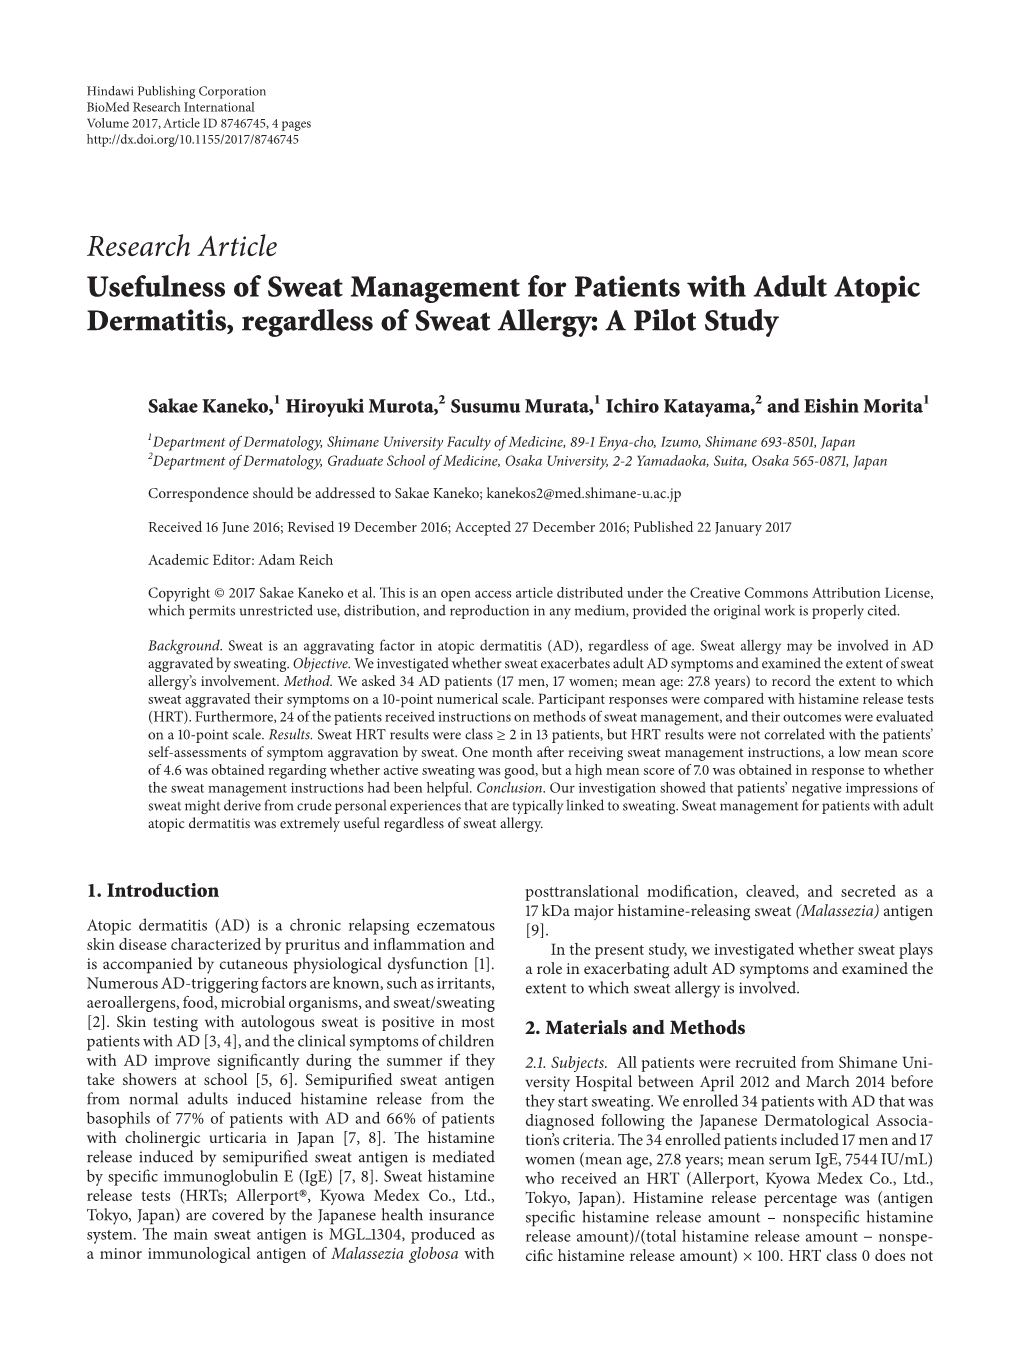 Usefulness of Sweat Management for Patients with Adult Atopic Dermatitis, Regardless of Sweat Allergy: a Pilot Study